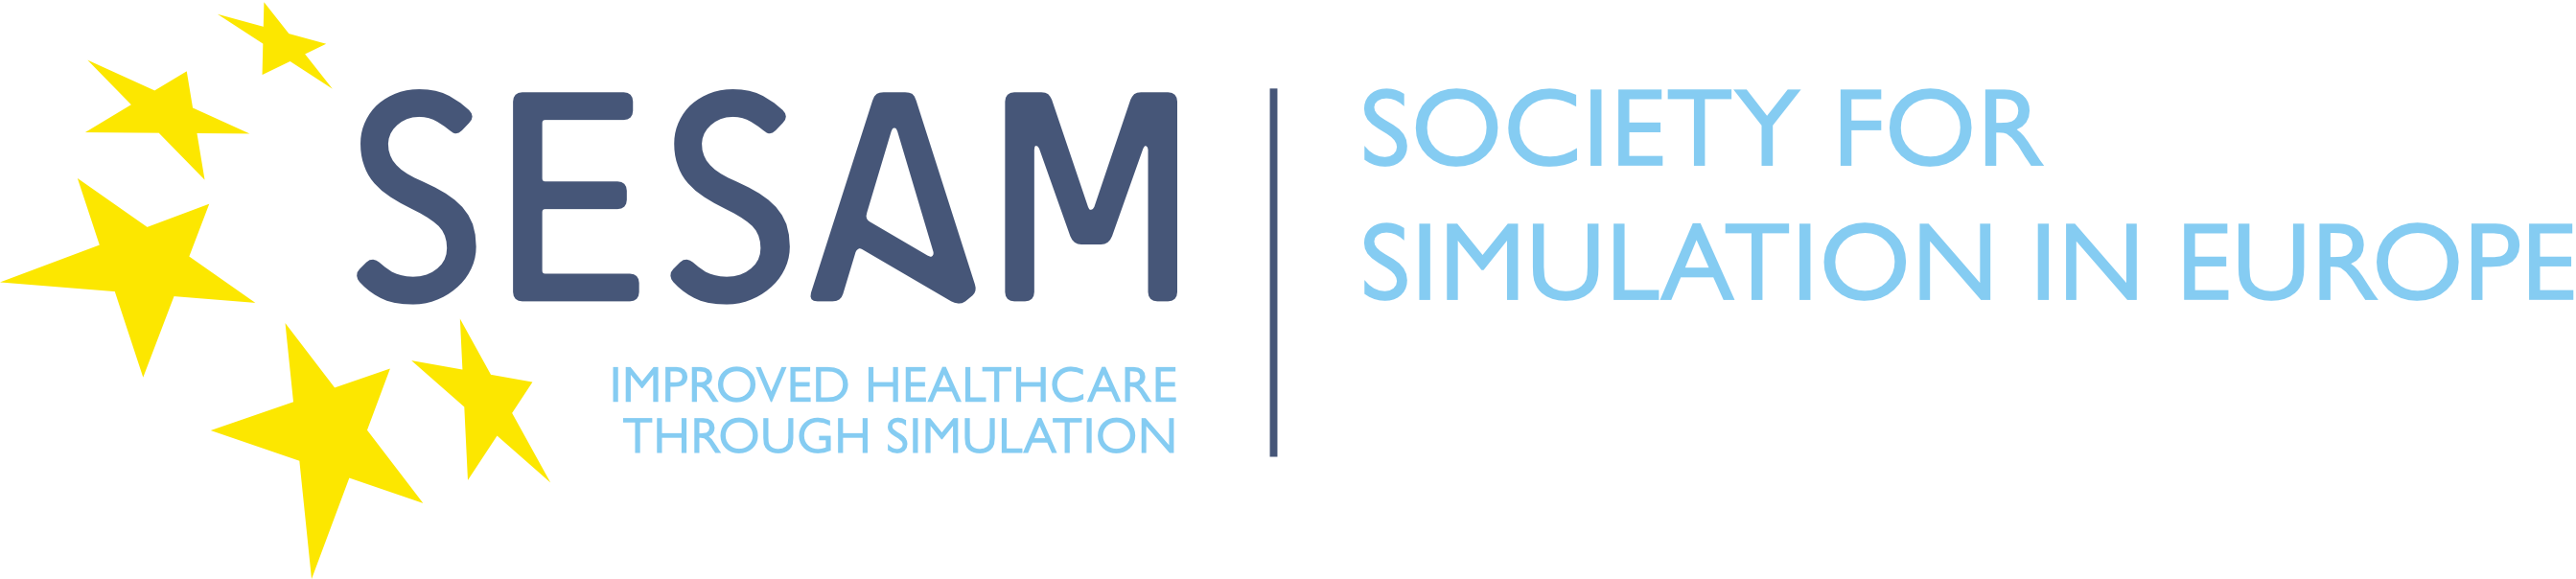 SESAM - Society in Europe for Simulation applied to medicine